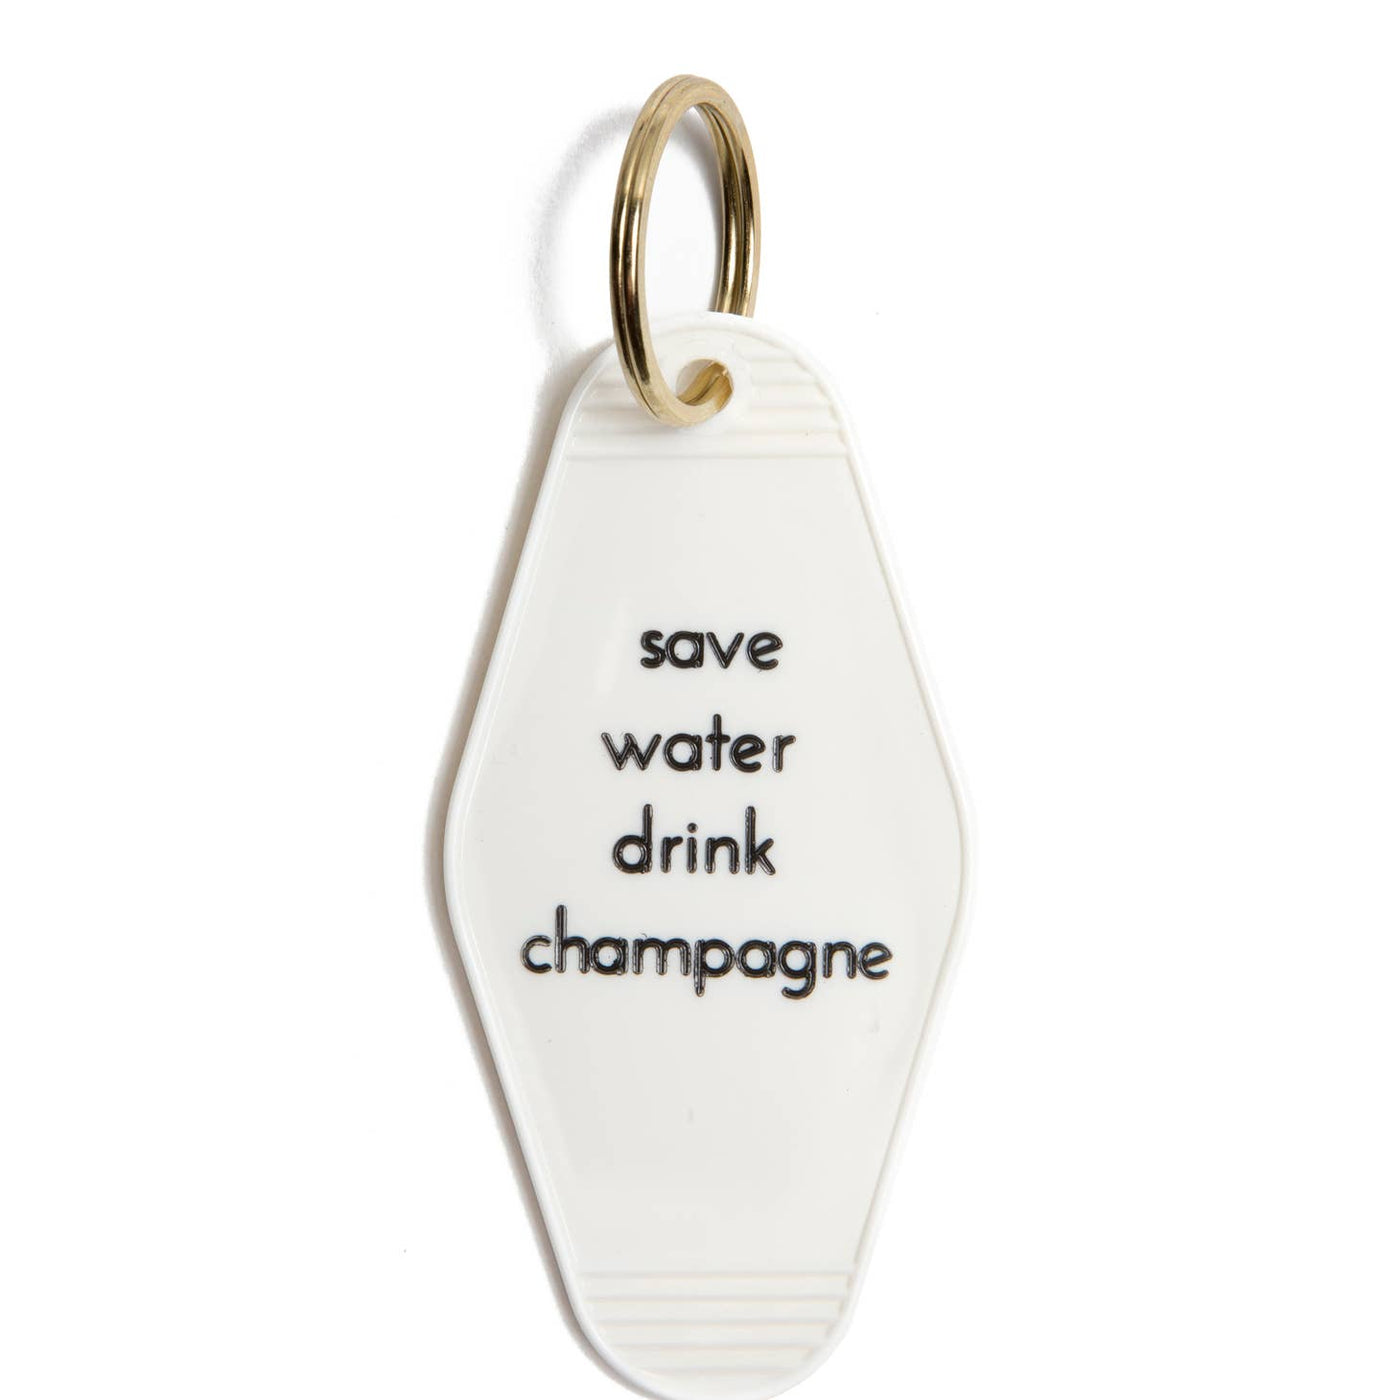 Save Water Drink Champagne Motel Key Tag